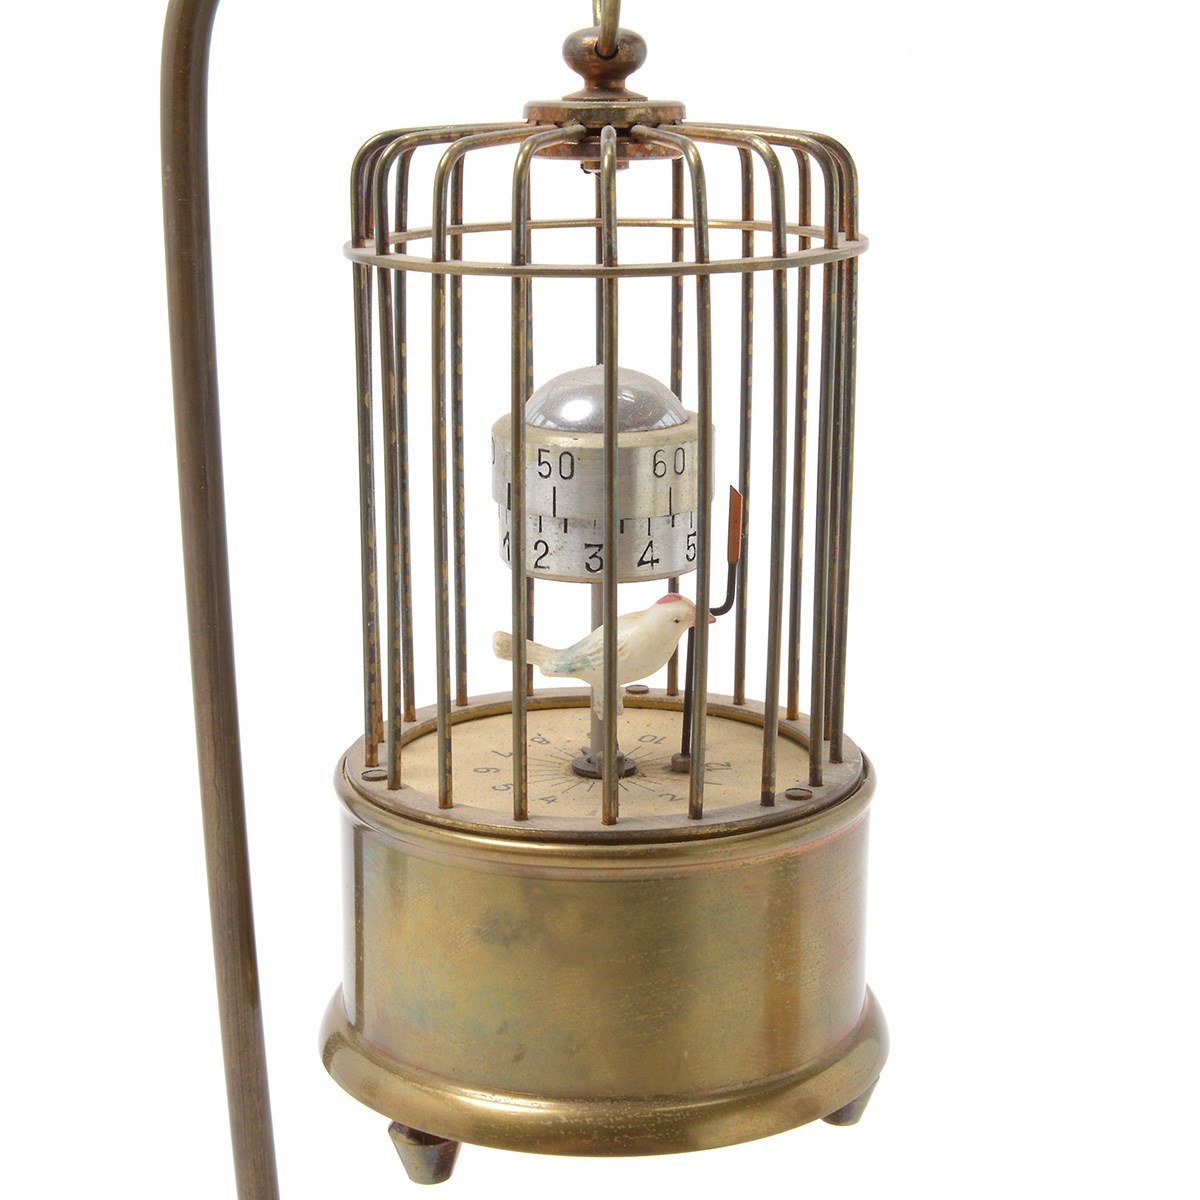 Three Hanging Birdcage Music Boxes with Clock Mechanism - Image 7 of 13